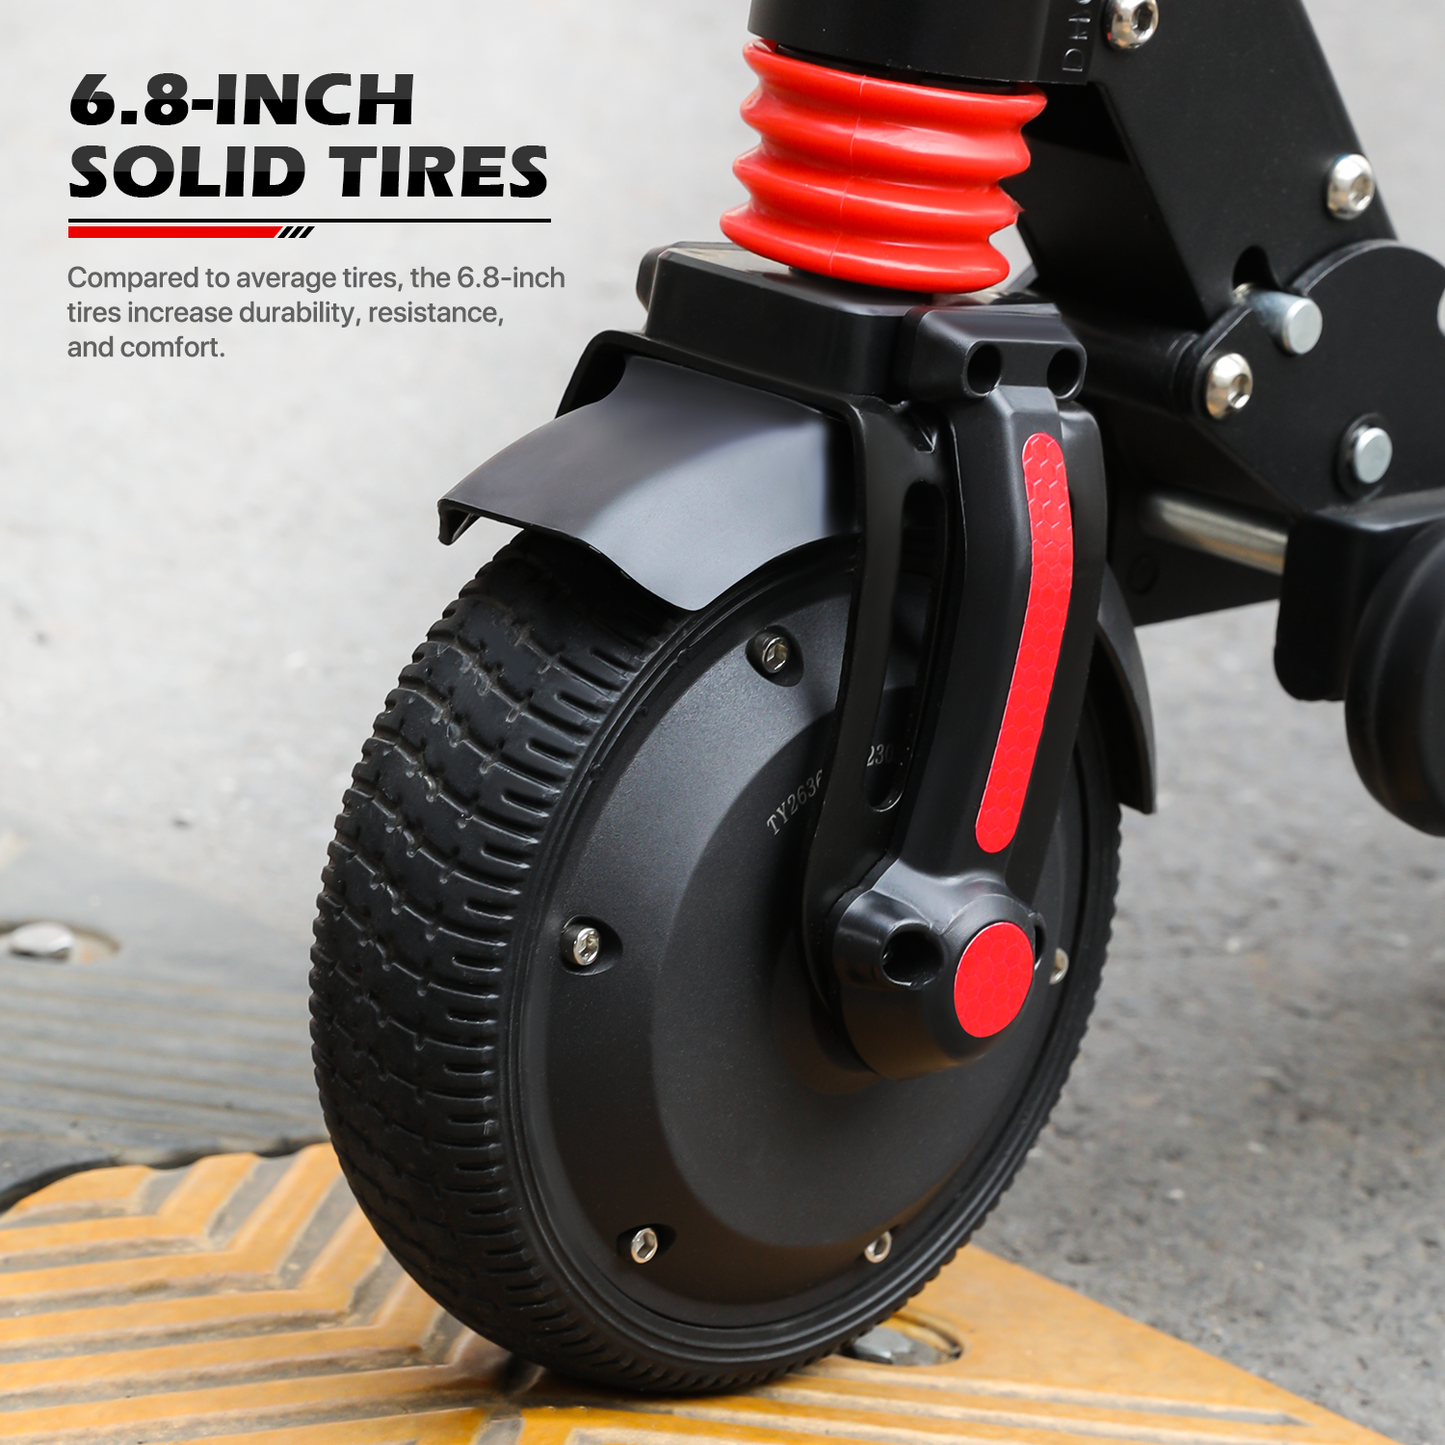 Electric Scooter - 36V, 5.2A, Black